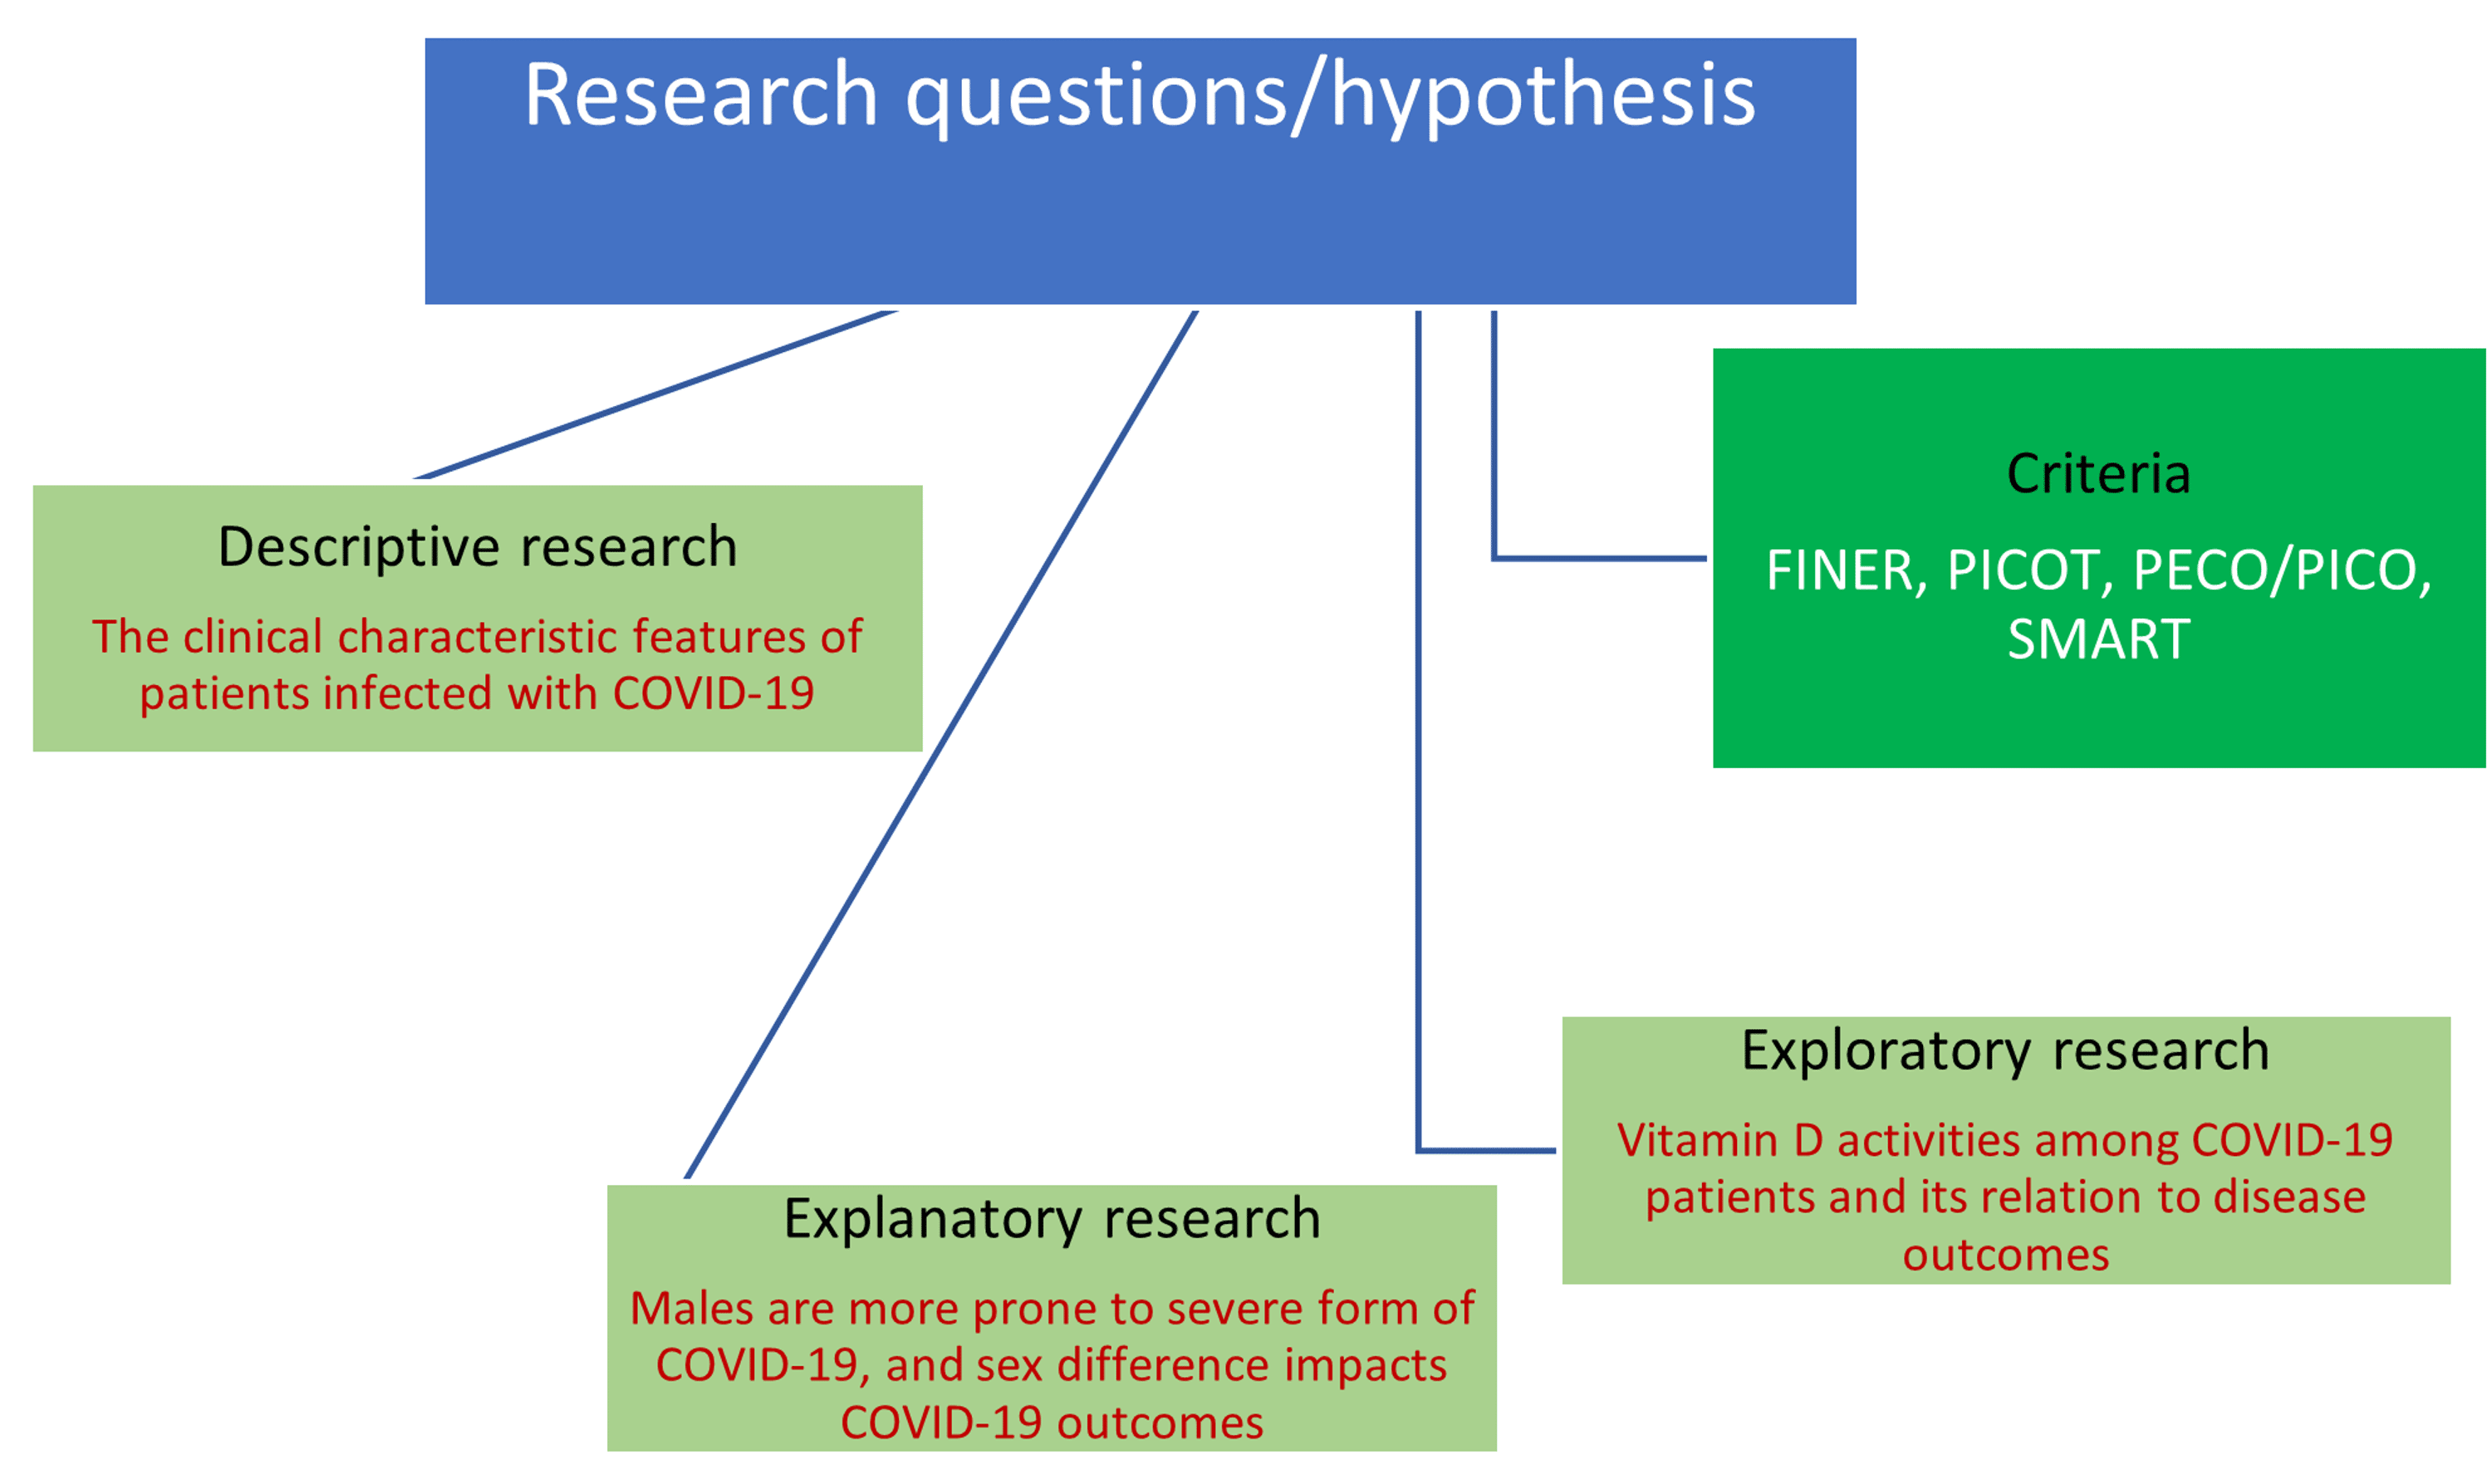 framing the research question using pico strategy